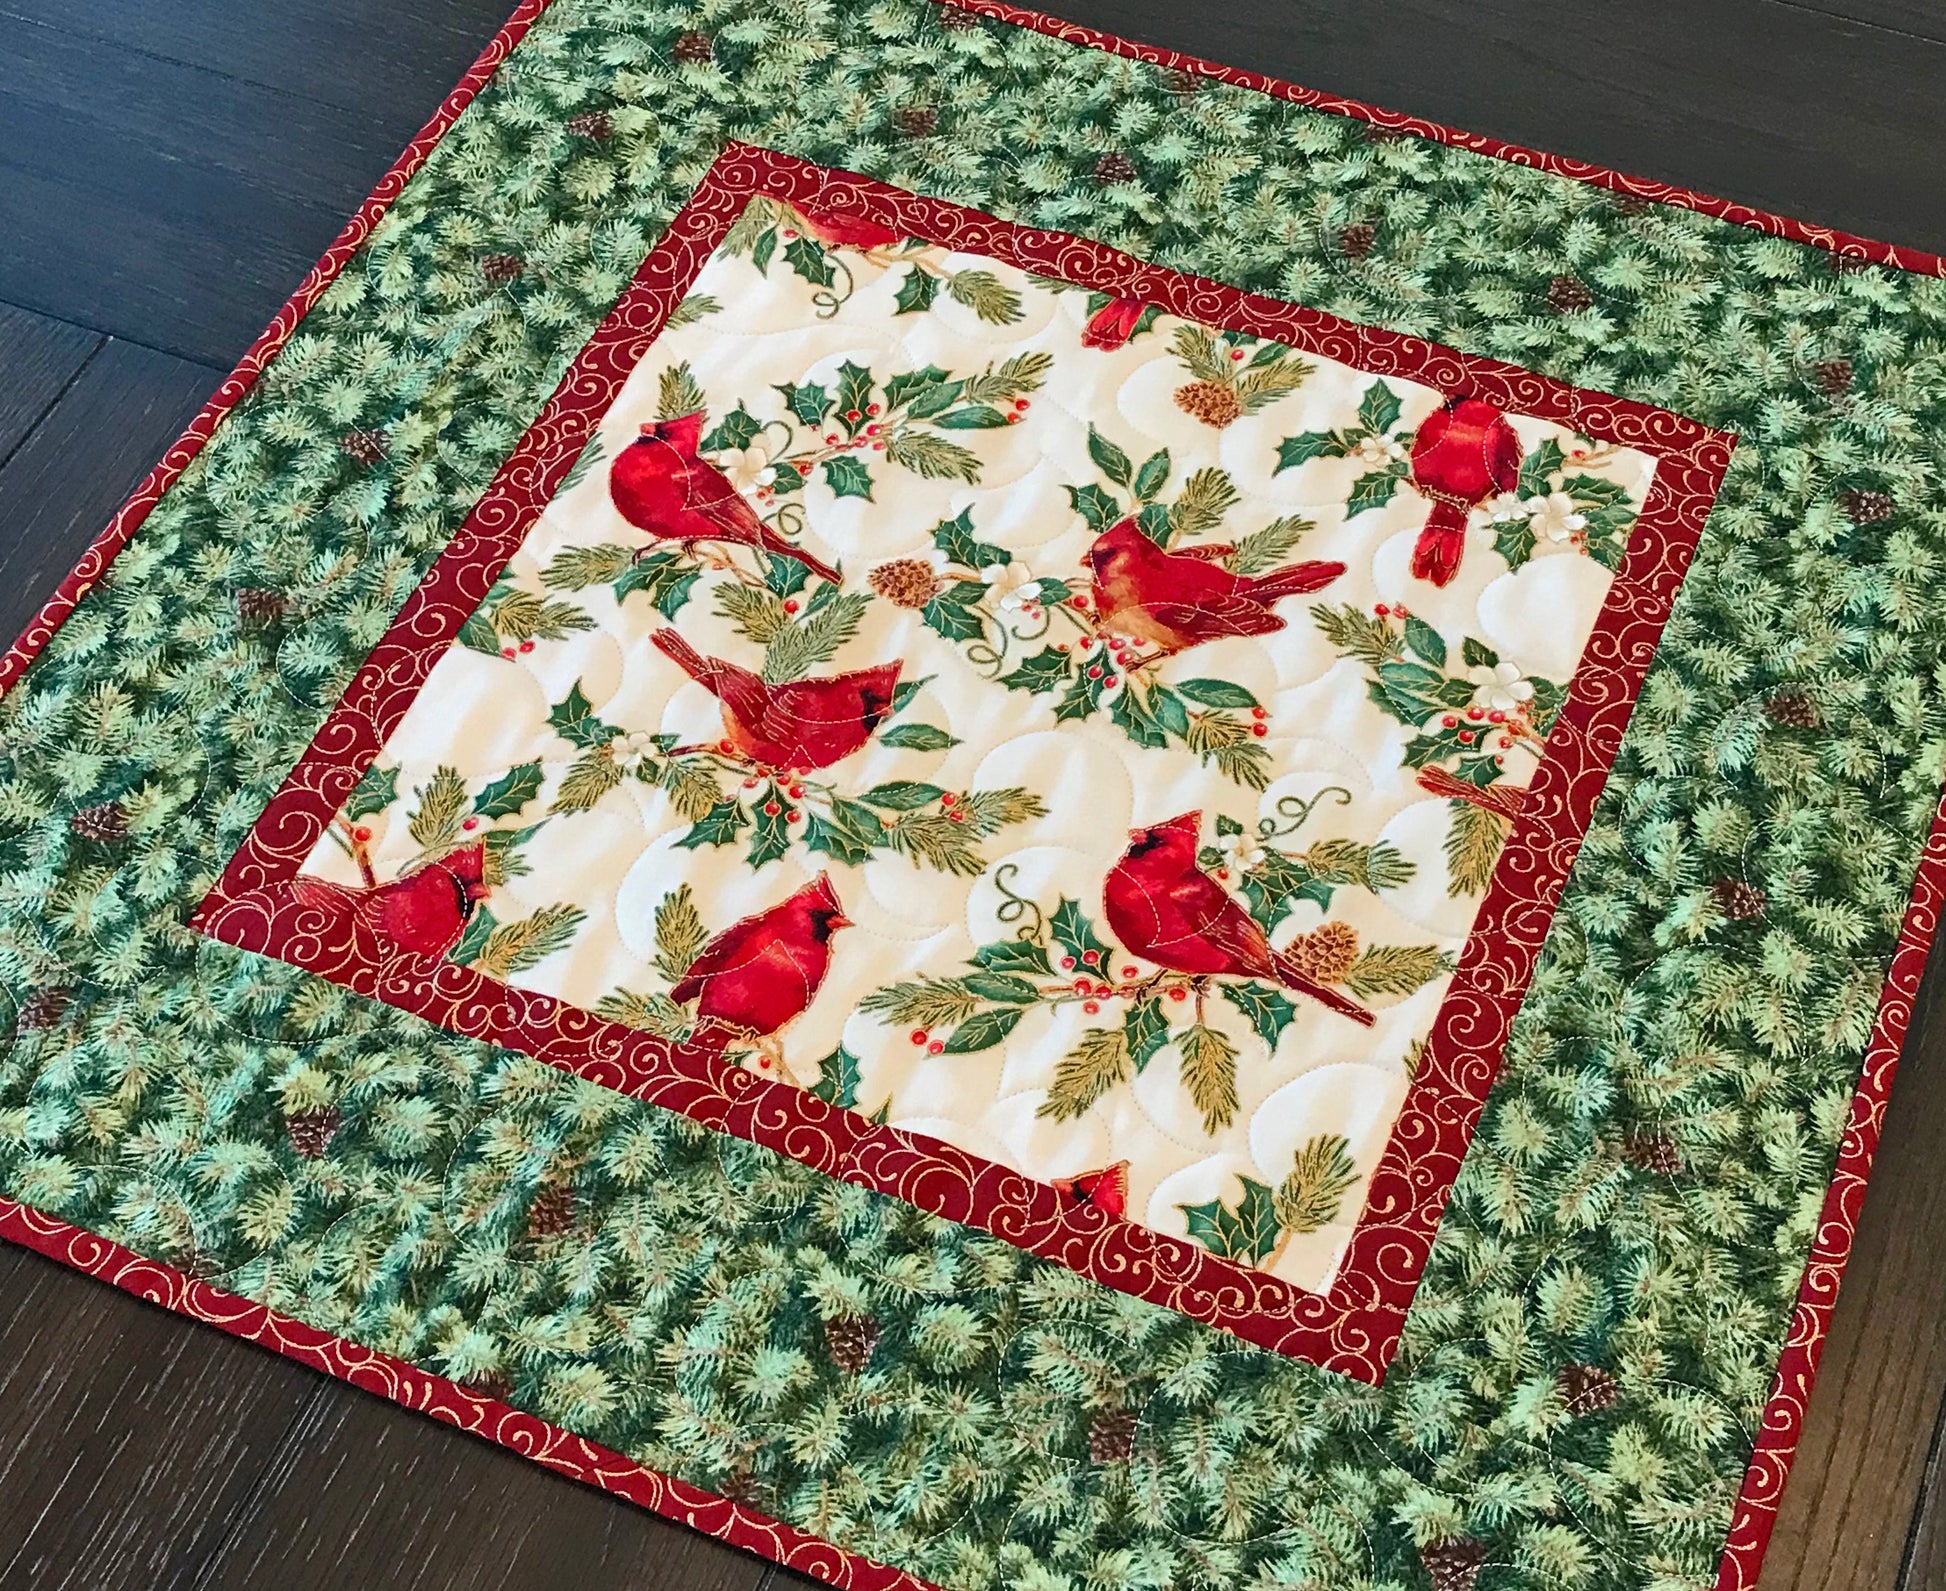 Christmas Cardinal Table Topper - Handmade Quilts, Digital Patterns, and Home Décor items online - Cuddle Cat Quiltworks